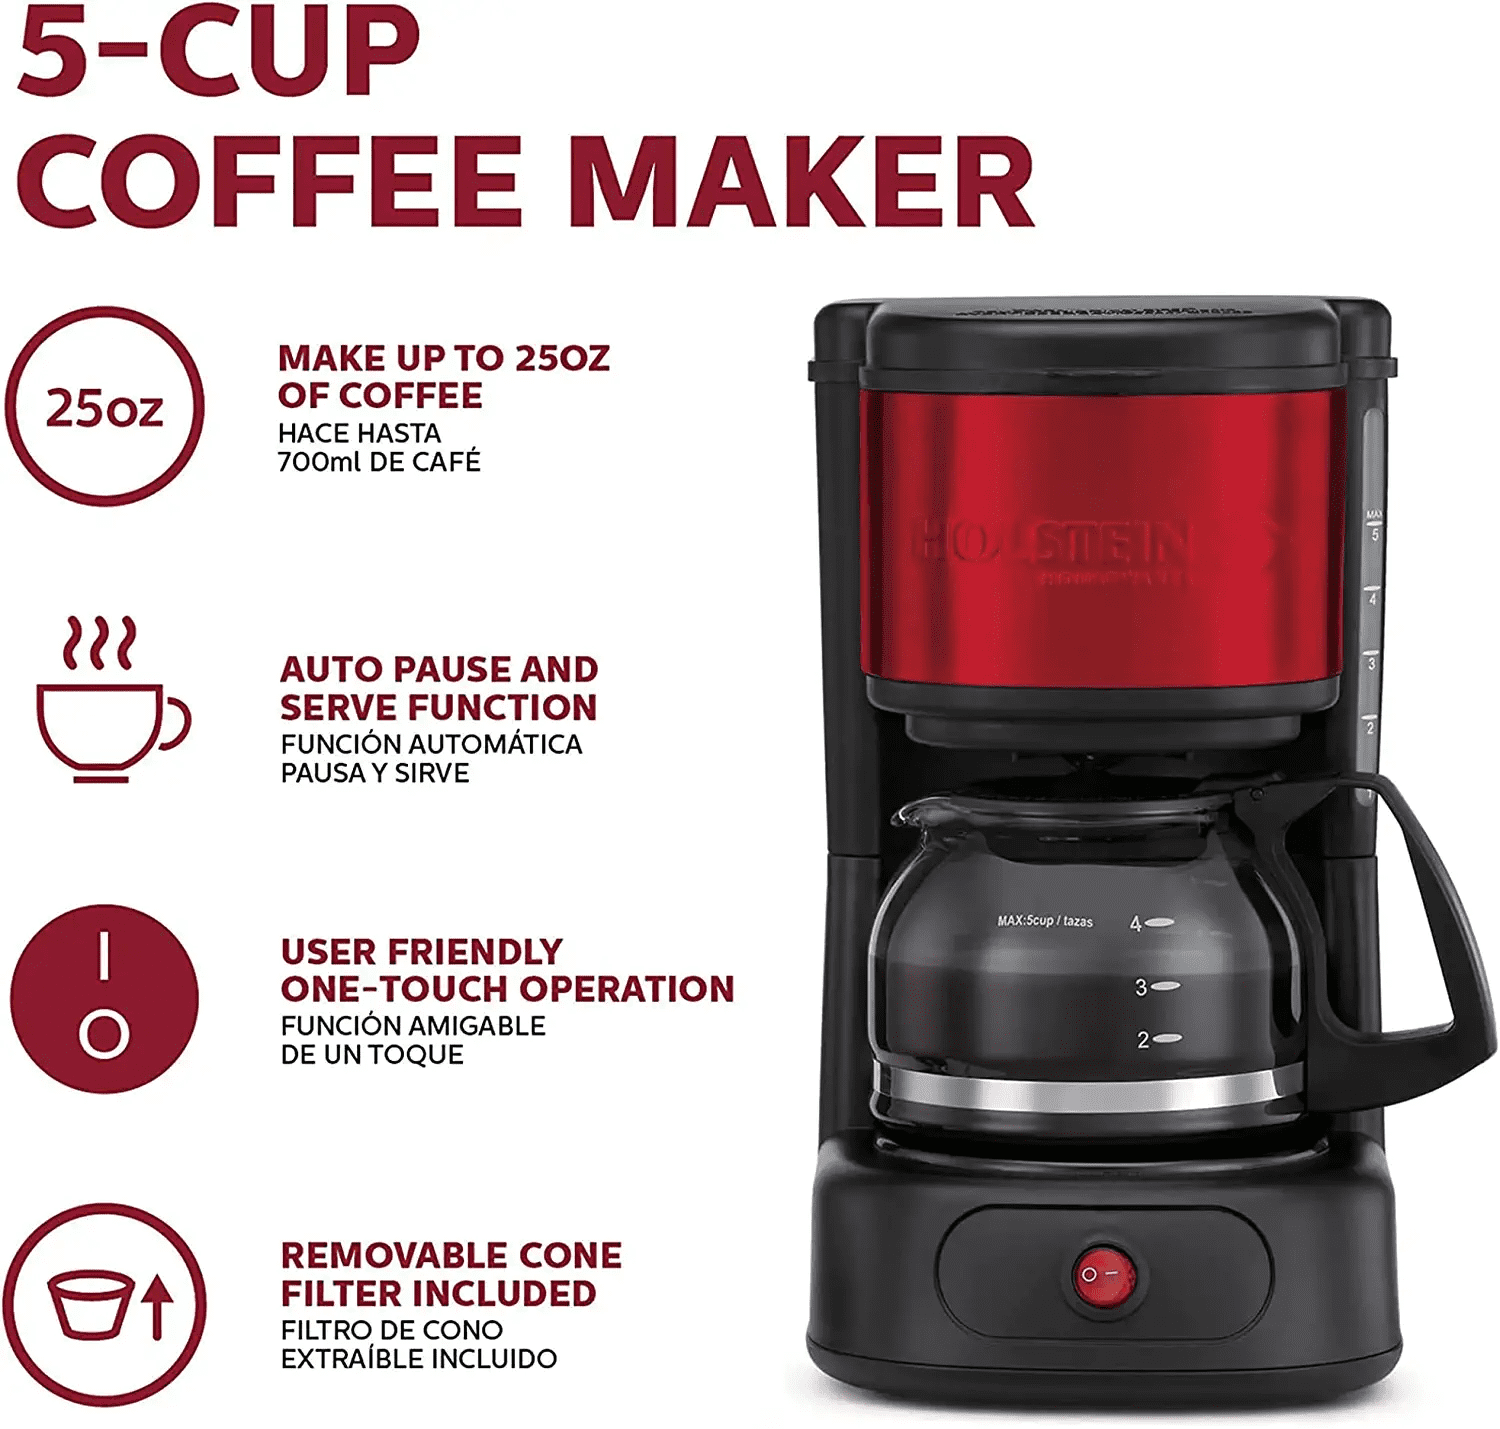 Personal Coffee Maker (5) Cup ECM-9607 New in Box with User's Manual